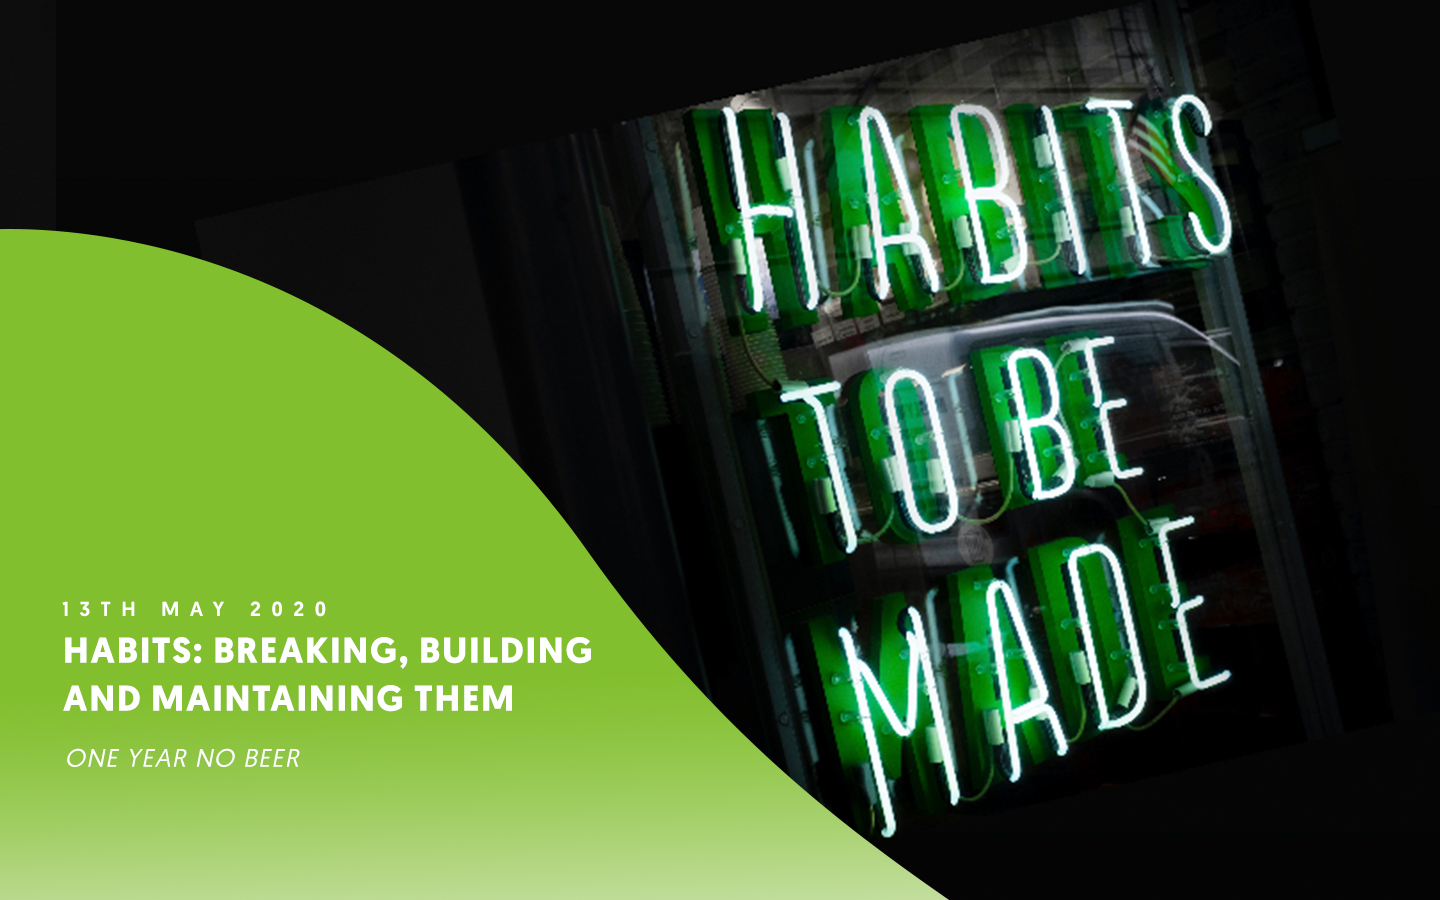 Habits: Breaking, building and maintaining them